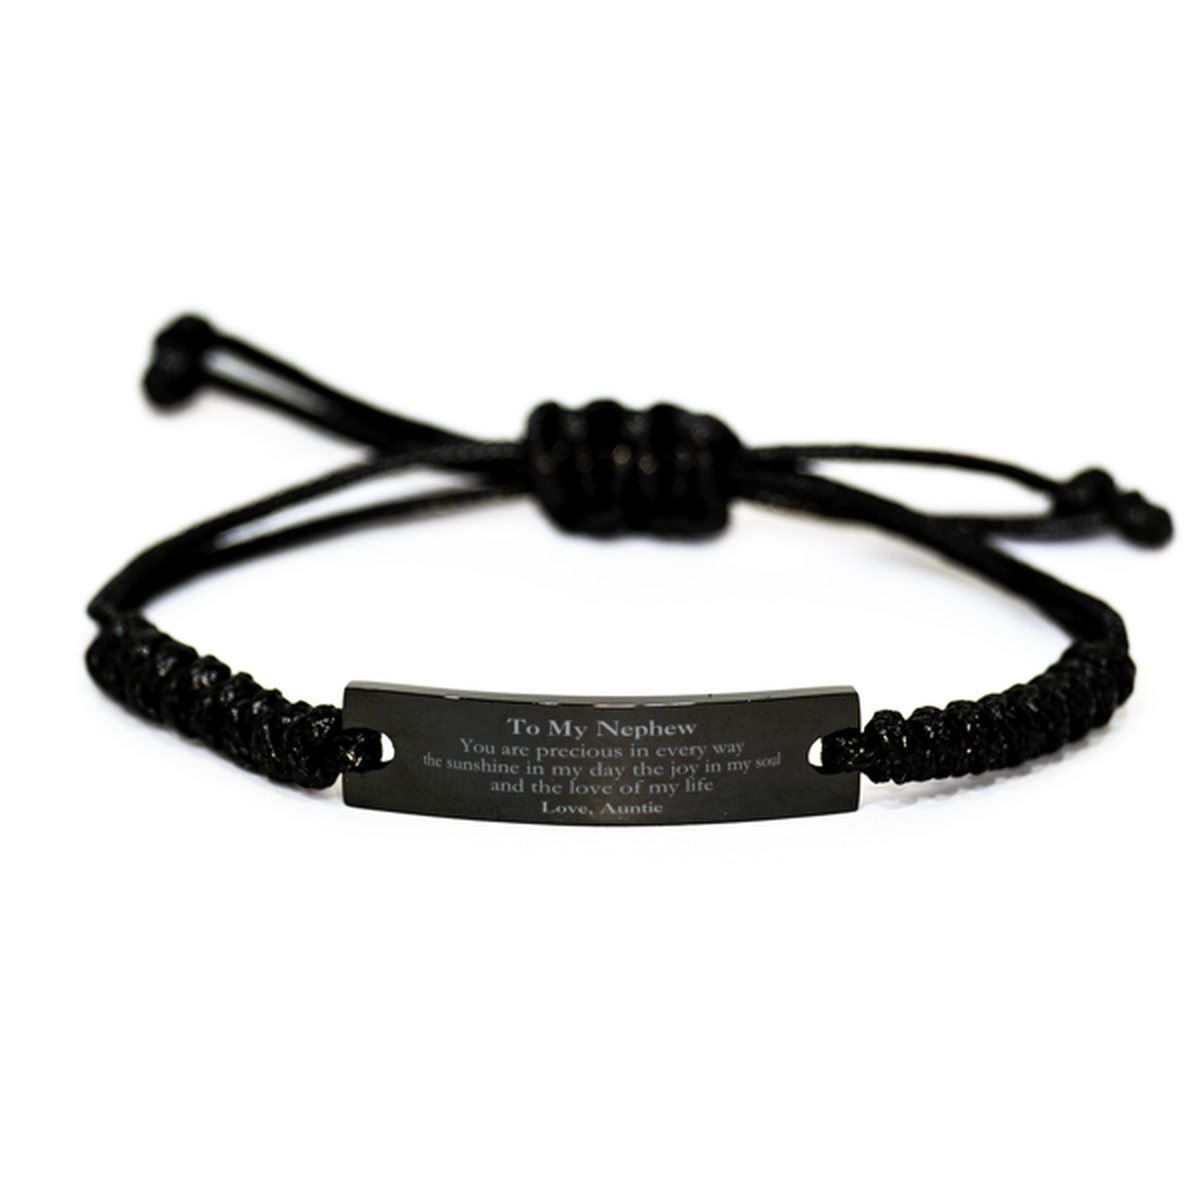 Graduation Gifts for Nephew Black Rope Bracelet Present from Auntie, Christmas Nephew Birthday Gifts Nephew You are precious in every way the sunshine in my day. Love, Auntie